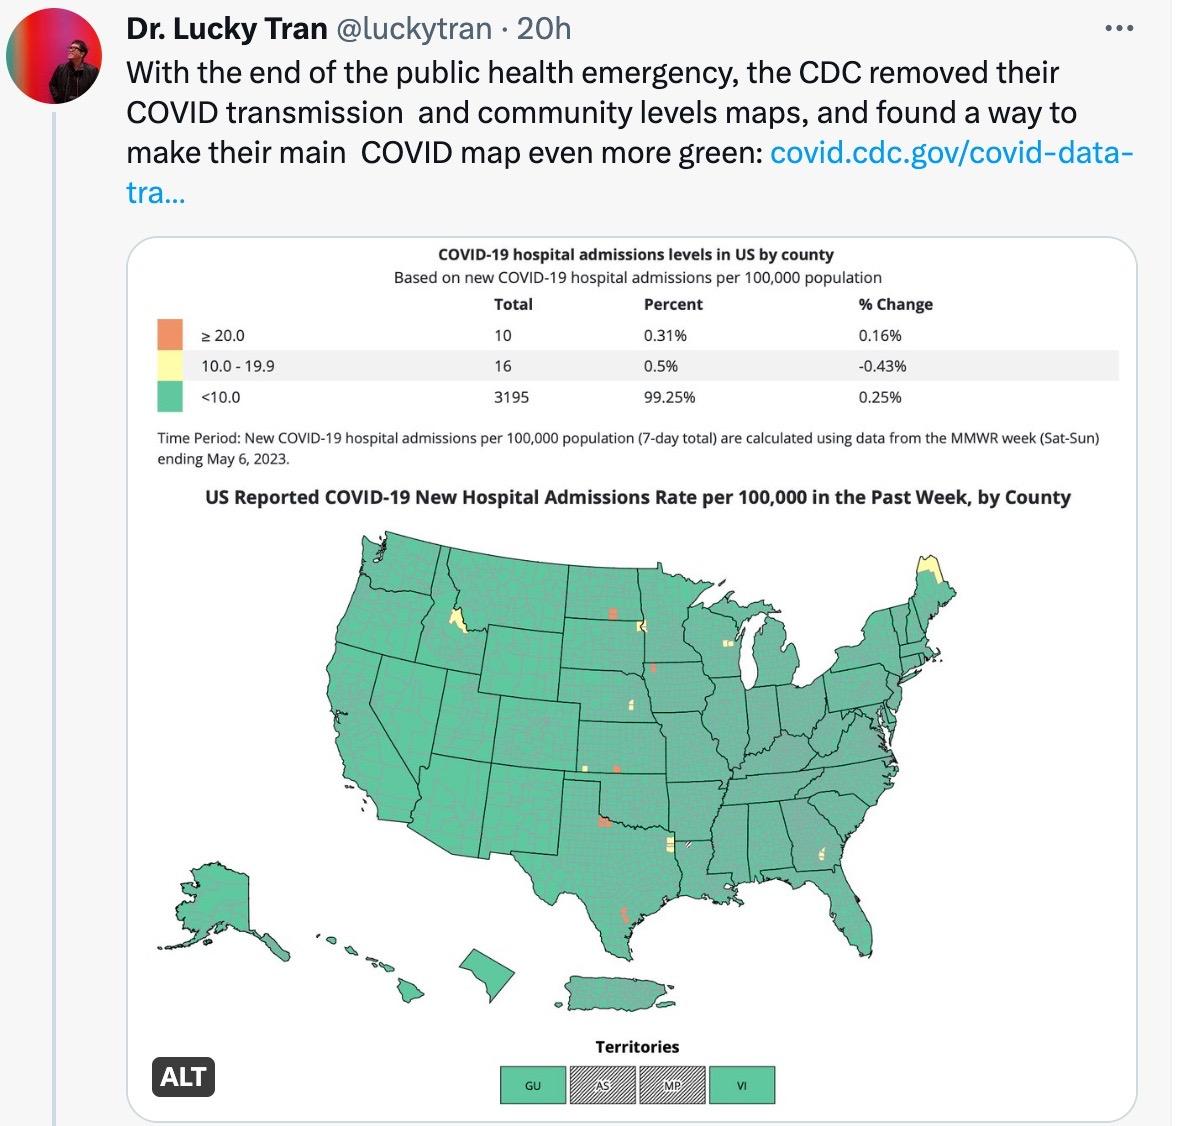 A screenshot of a tweet from Dr. Lucky Tran, dated May 11, 2023. The tweet reads: With the end of the public health emergency, the CDC removed their COVID transmission  and community levels maps, and found a way to make their main  COVID map even more green:https://covid.cdc.gov/covid-data-tracker/#cases_new-admissions-rate-county&quot;  The tweet shows an image: Map of US Reported COVID-19 New Hospital Admissions Rate per 100,000 in the Past Week, by County